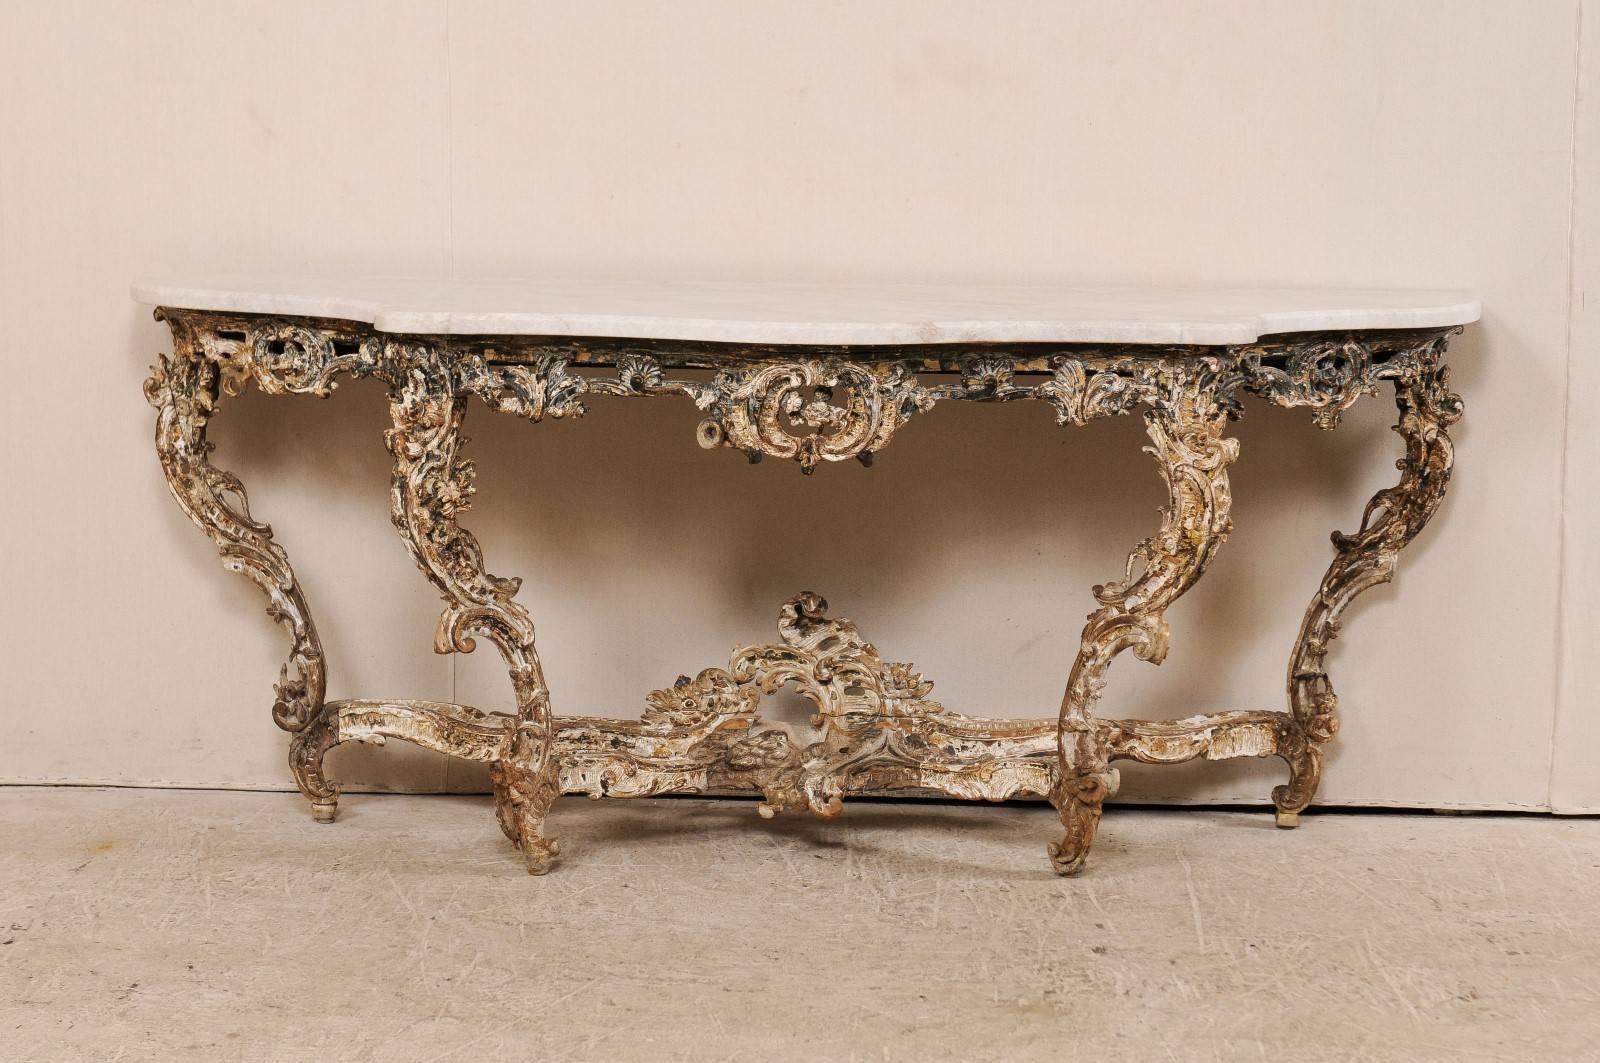 A French carved wood Rococo console table with marble top, 18th century. This gorgeous French console table features the typical French elaborate carvings of the Rococo period along the skirt, cross stretcher and four legs. The base is gesso and